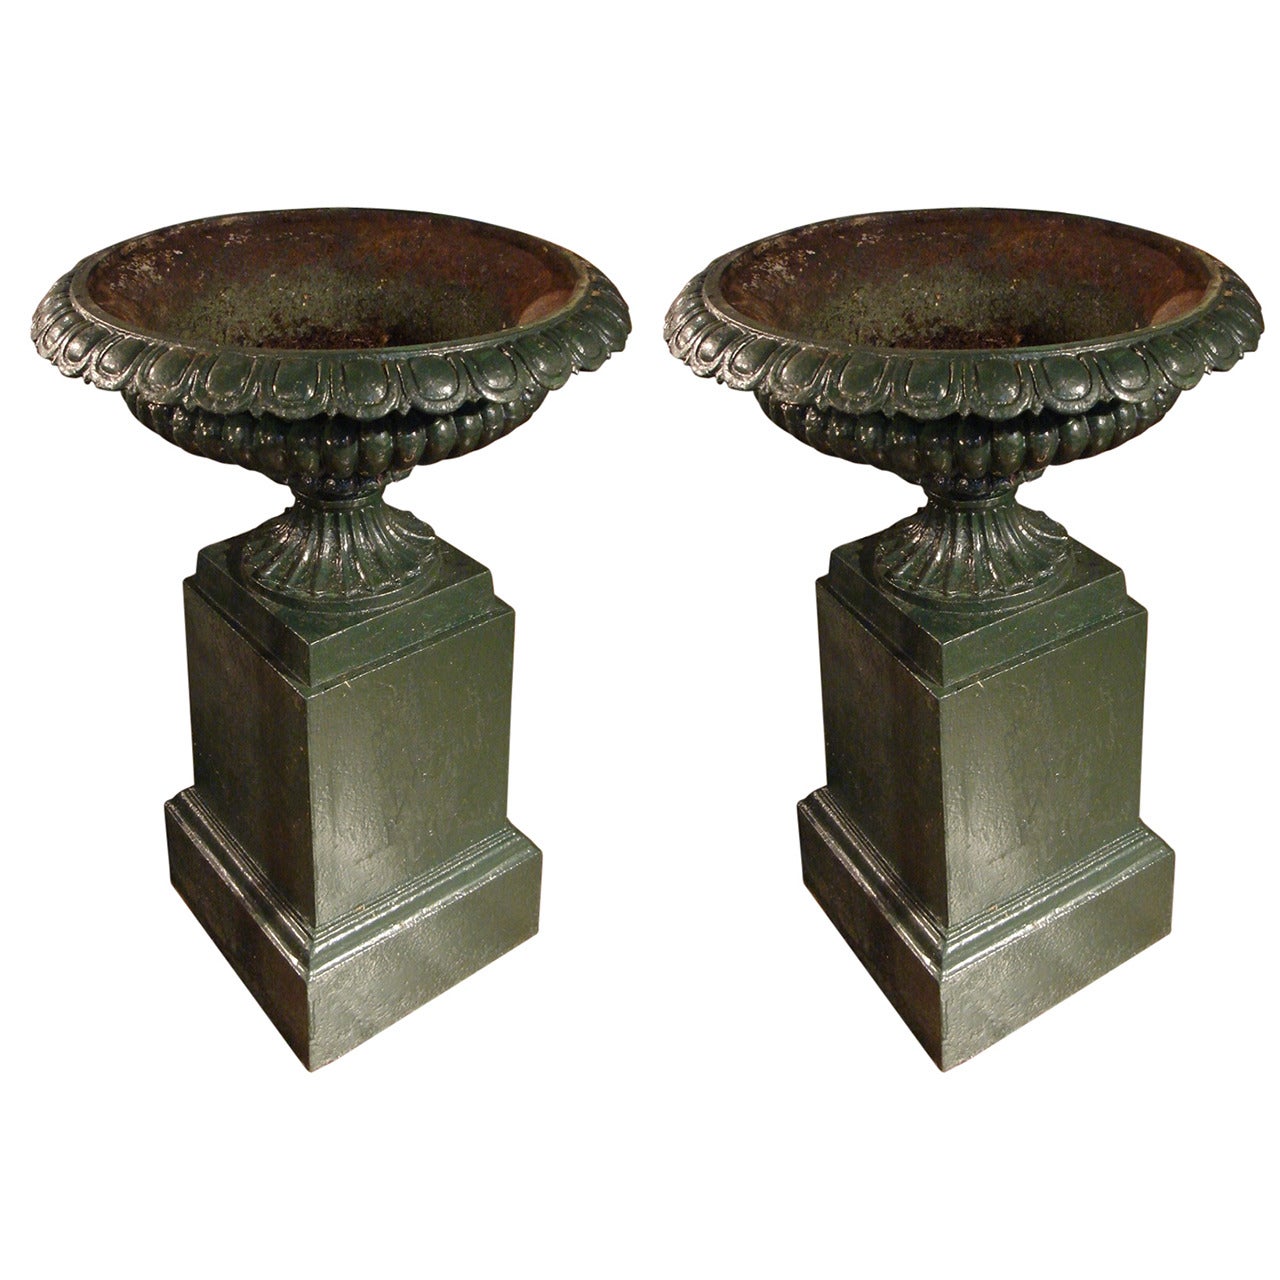 Pair of Mid-19th Century Green Painted Iron Garden Vases on Plinth Bases For Sale